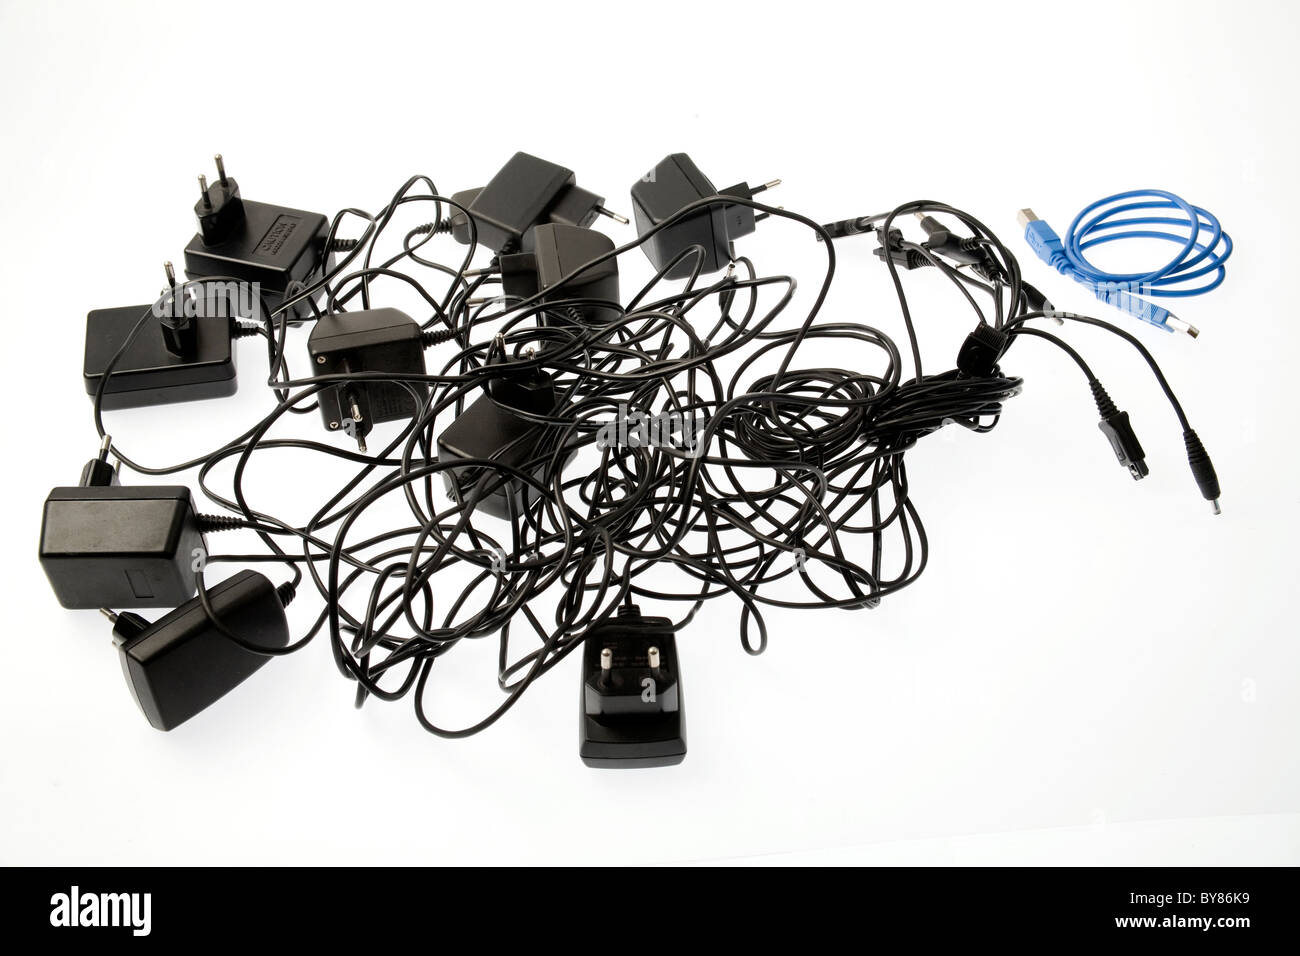 Cell phone chargers and USB cable on white background Stock Photo - Alamy